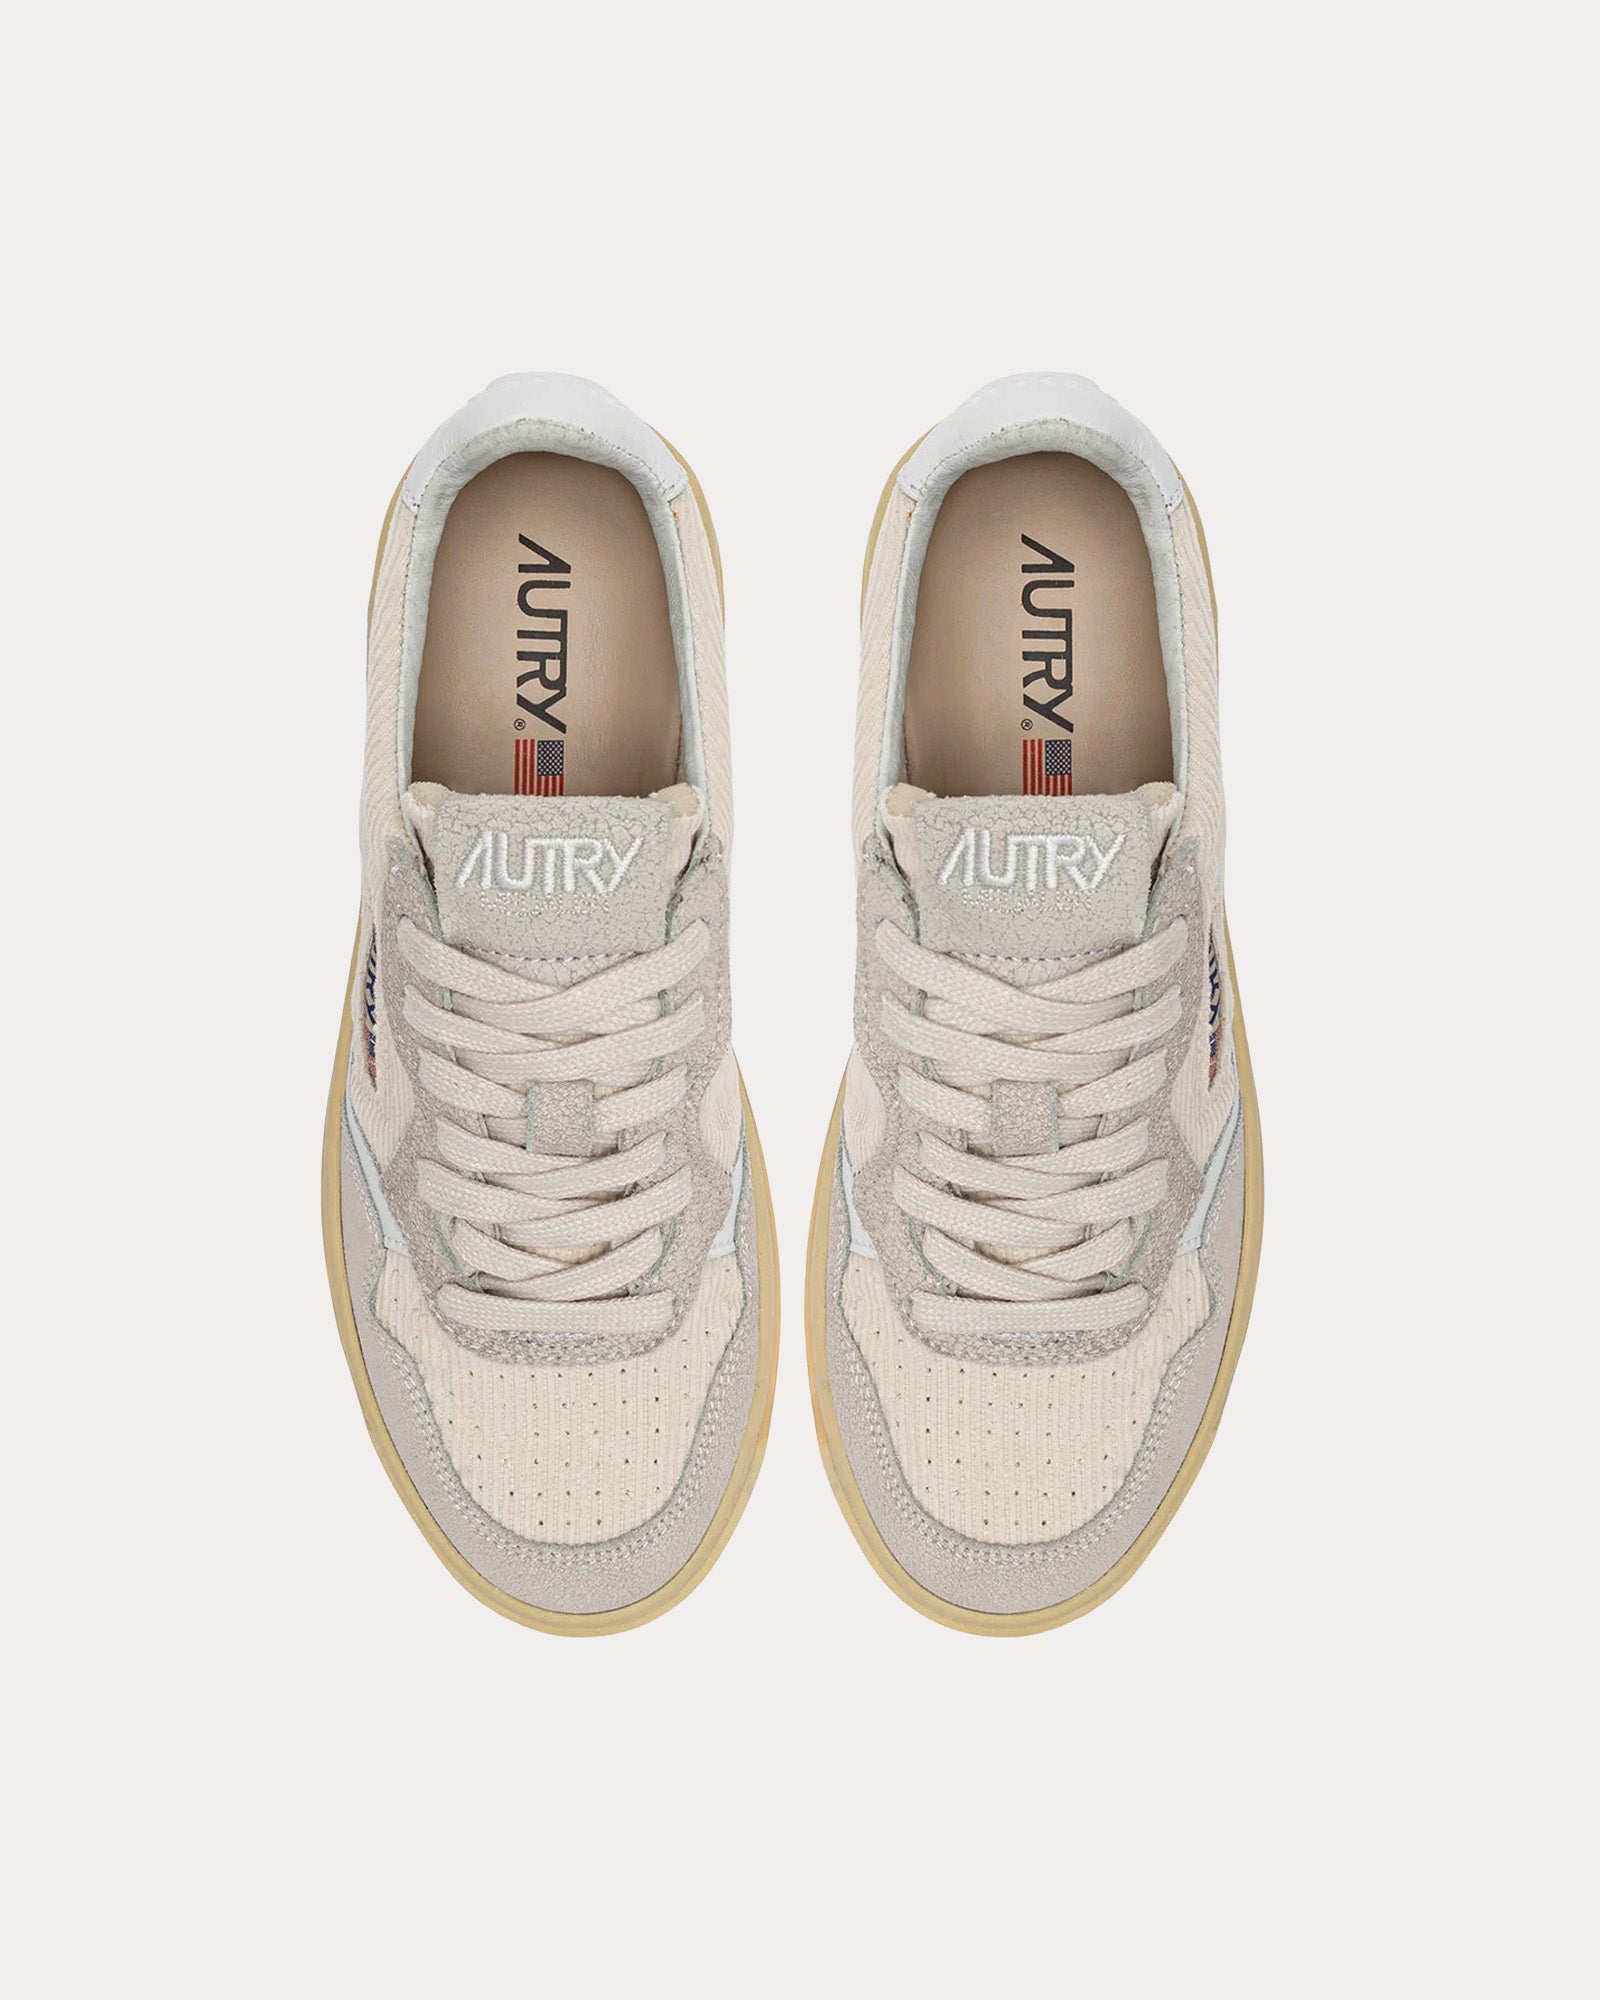 Autry - Medalist Ribbed Velvet & Suede White / Ivory Low Top Sneakers